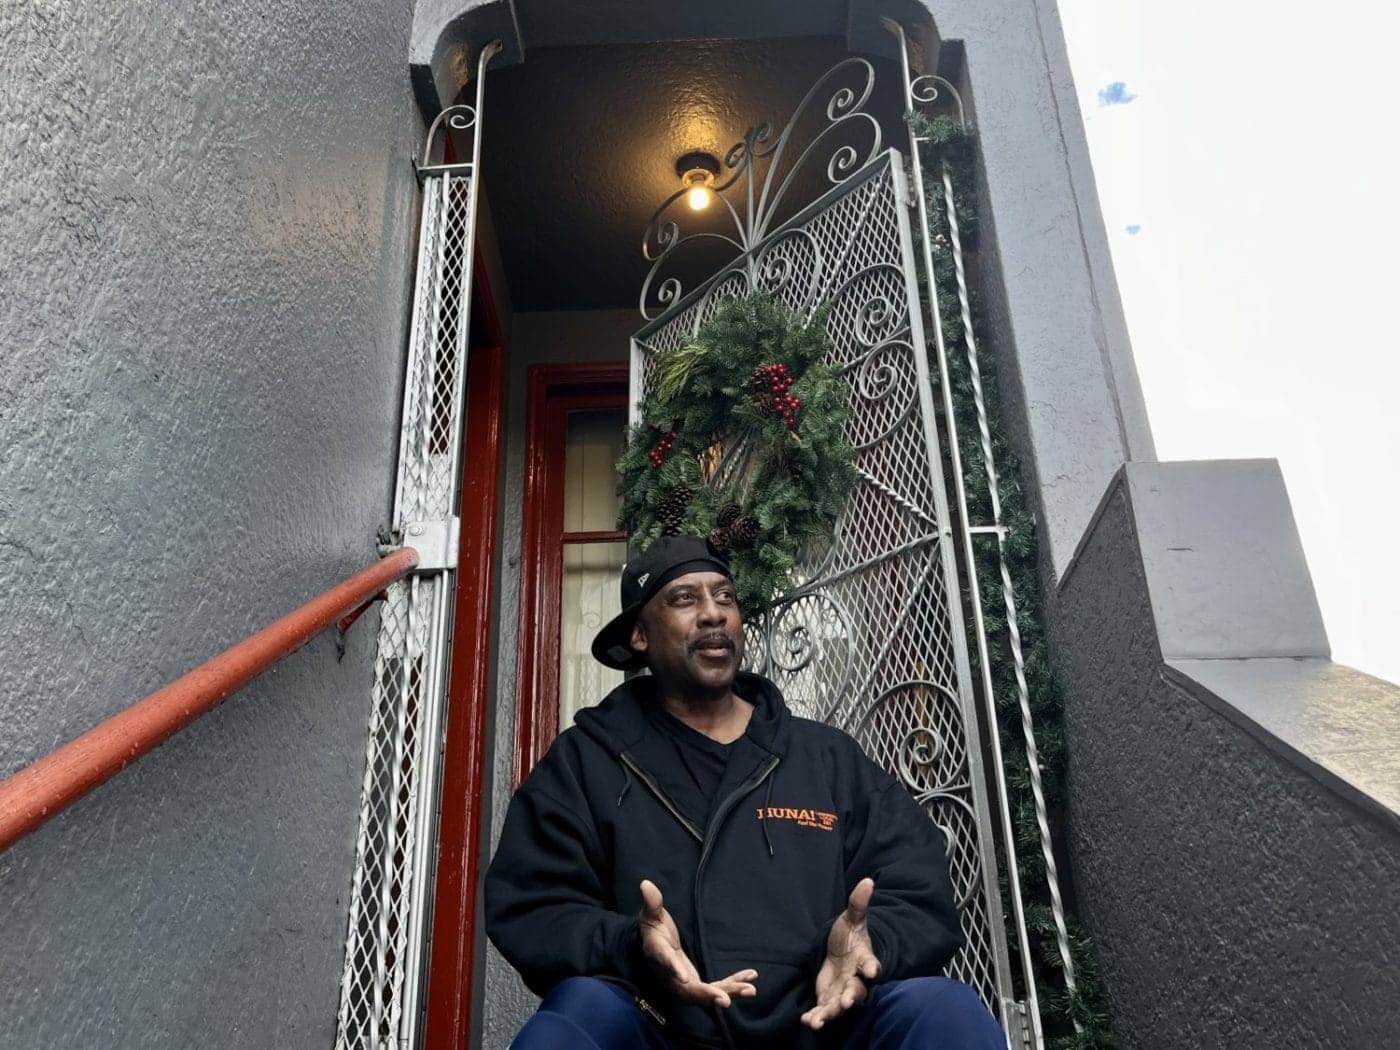 Joseph-Williams-at-1315-Revere-in-Bayview-by-Griffin-Jones-121723-1400x1050, Dozens of disabled, chronically homeless people face eviction from Bayview homes, Featured Local News & Views News & Views 